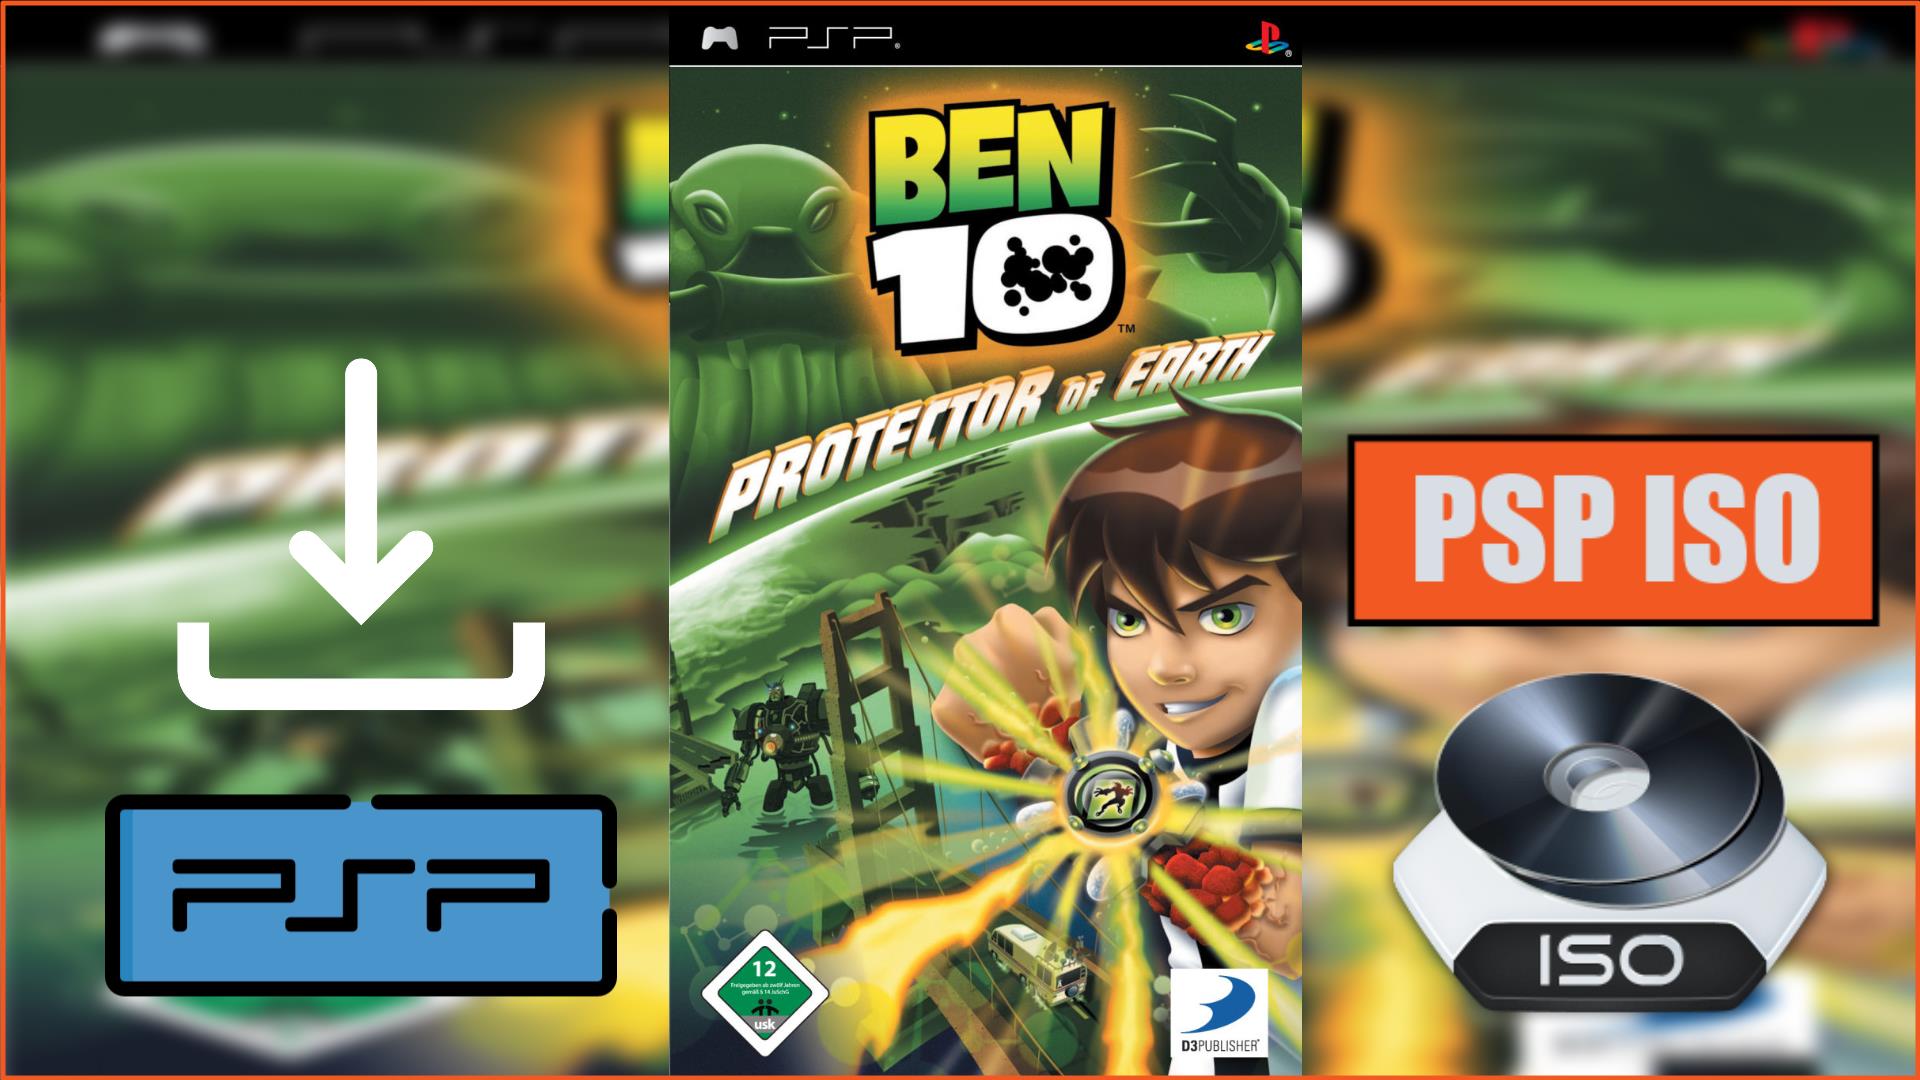 Ben 10 Protector of Earth PSP ISO Download